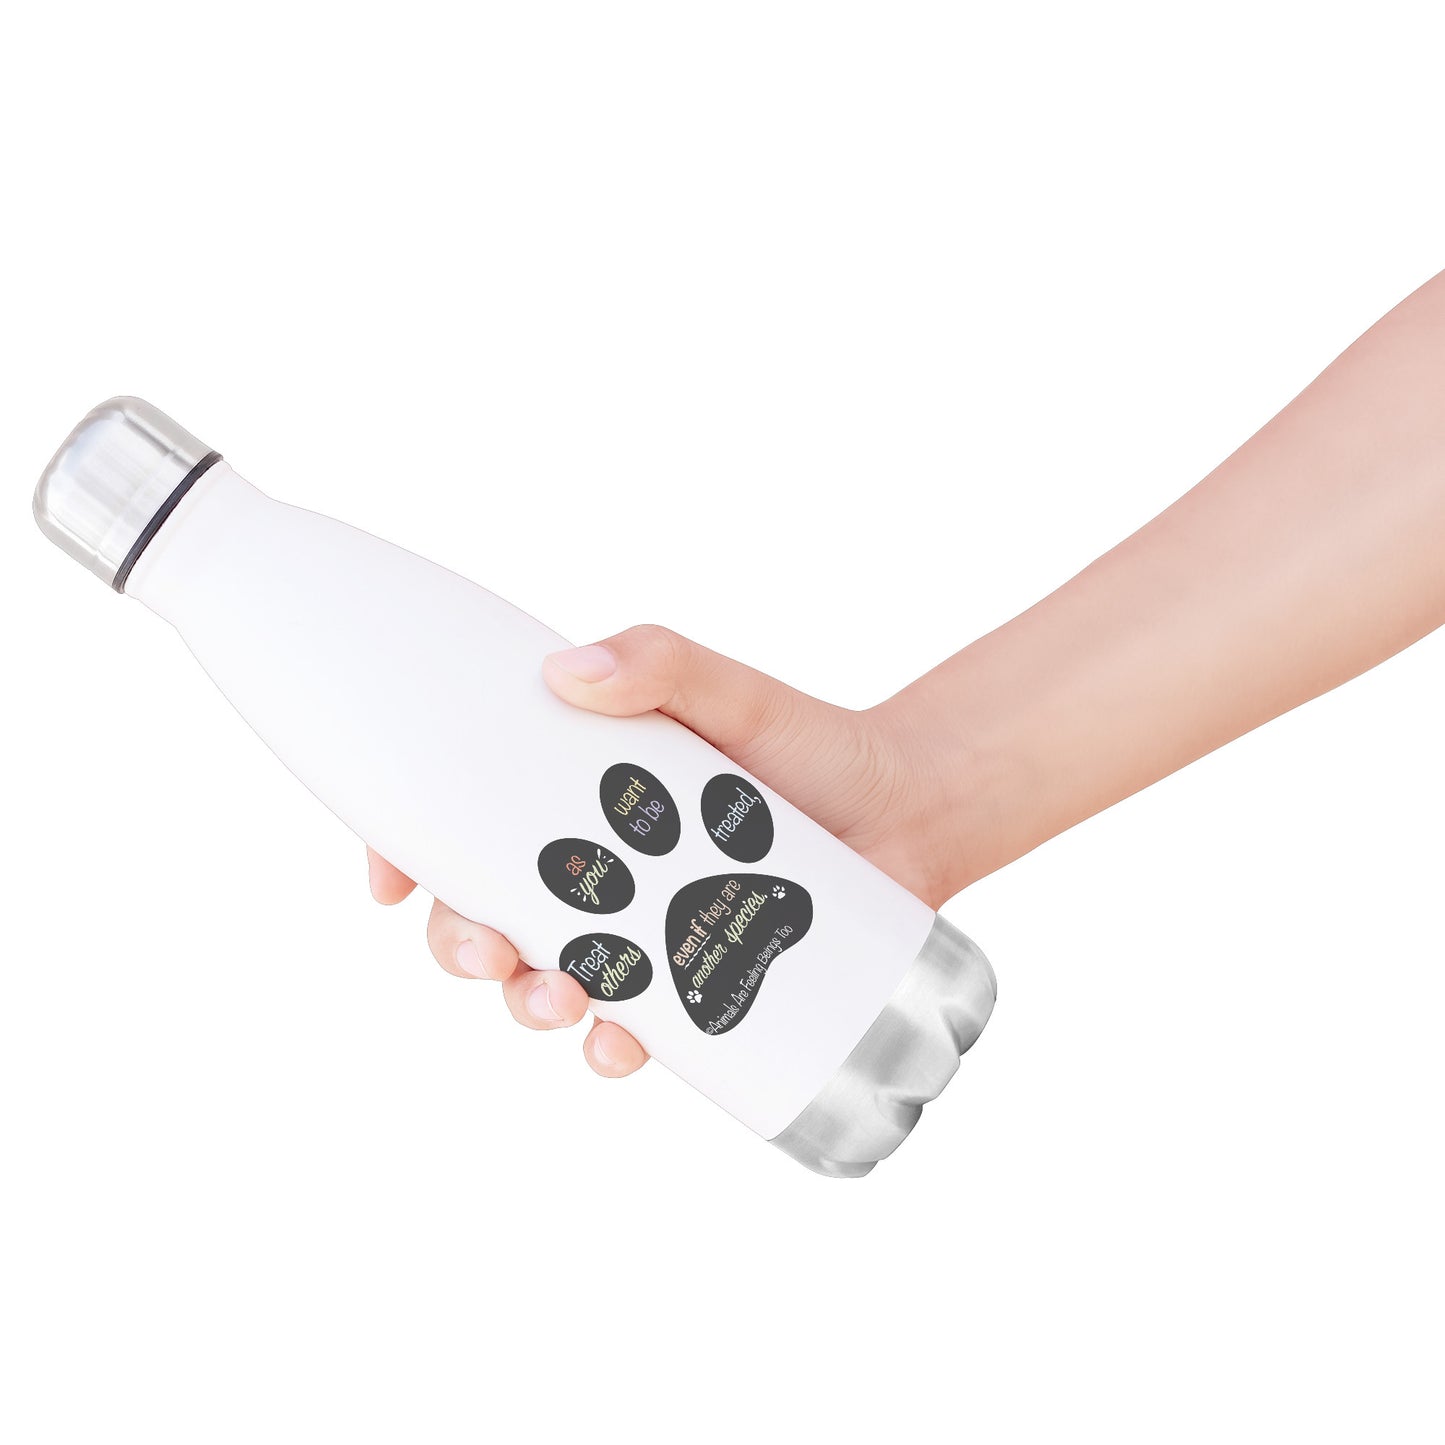 Special Paw Print 20oz Insulated Water Bottle